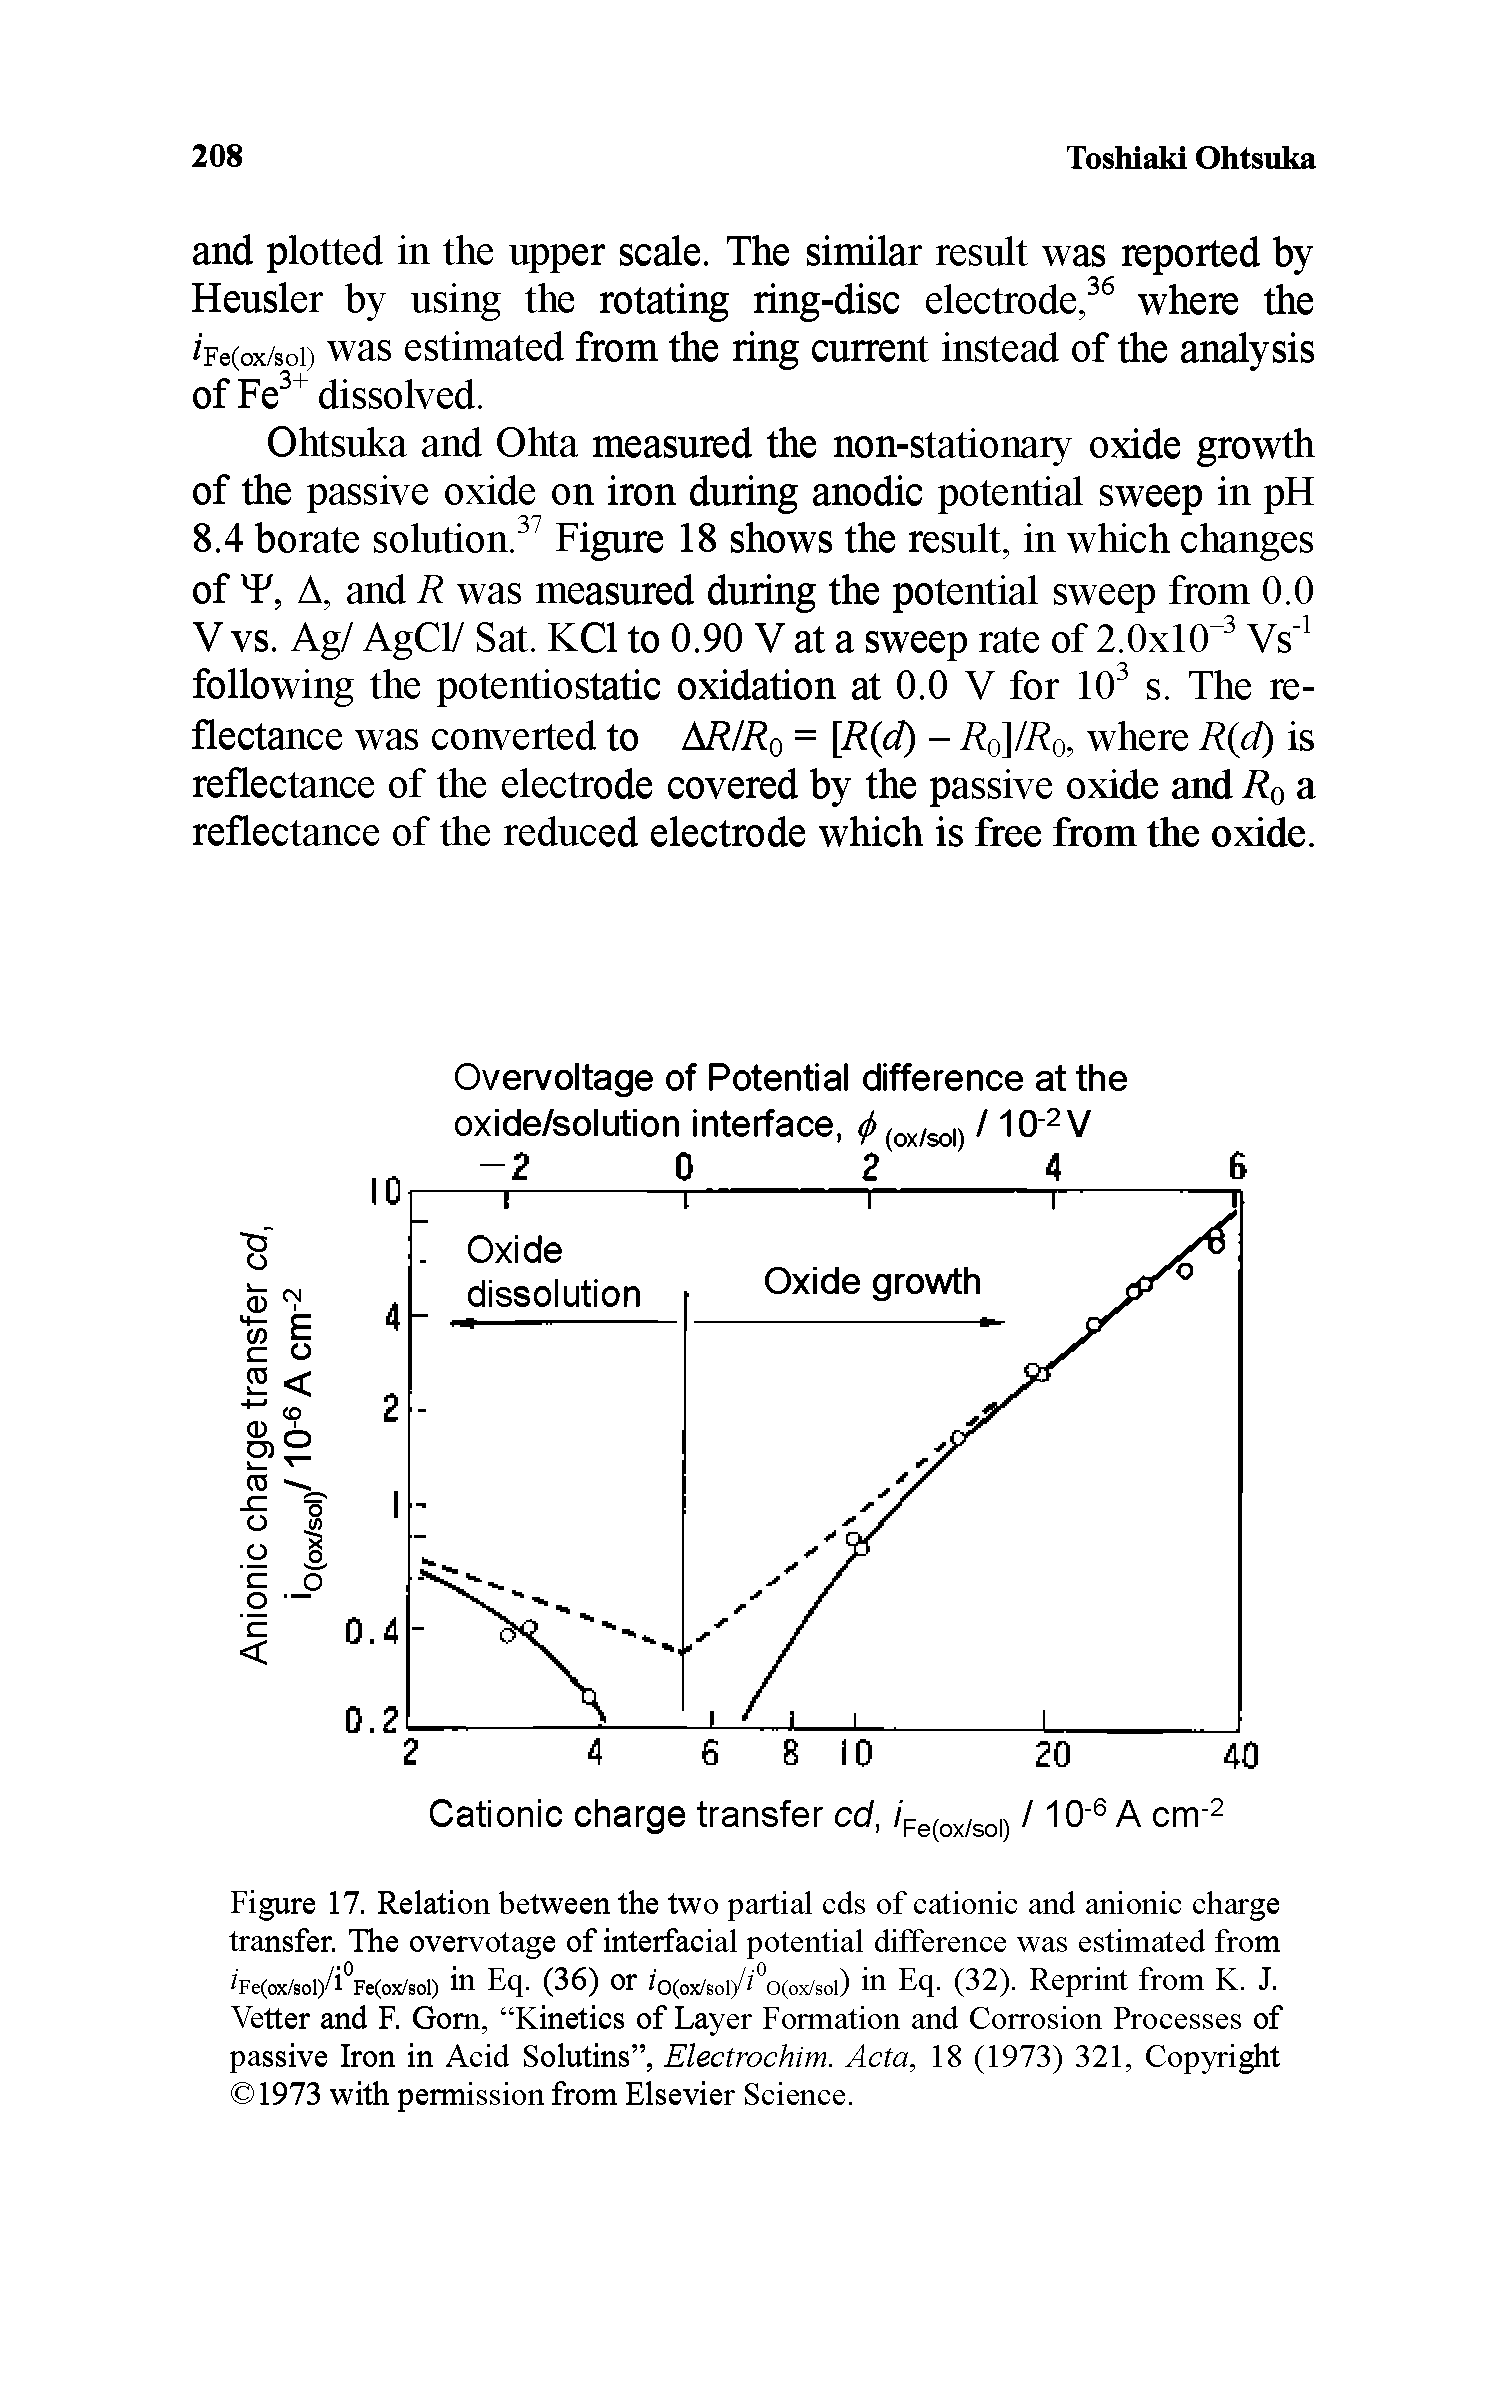 Figure 17. Relation between the two partial cds of cationic and anionic charge transfer. The overvotage of interfacial potential difference was estimated from iFe(ox/soi)/i°Ft(ox/.oi) in Eq. (36) or io(ox/soi/i"o(o c/soi) in Eq. (32). Reprint from K. J. Vetter and F. Gom, Kinetics of Layer Formation and Corrosion Processes of passive Iron in Acid Solutins , Electrochim. Acta, 18 (1973) 321, Copyright 1973 with permission from Elsevier Science.